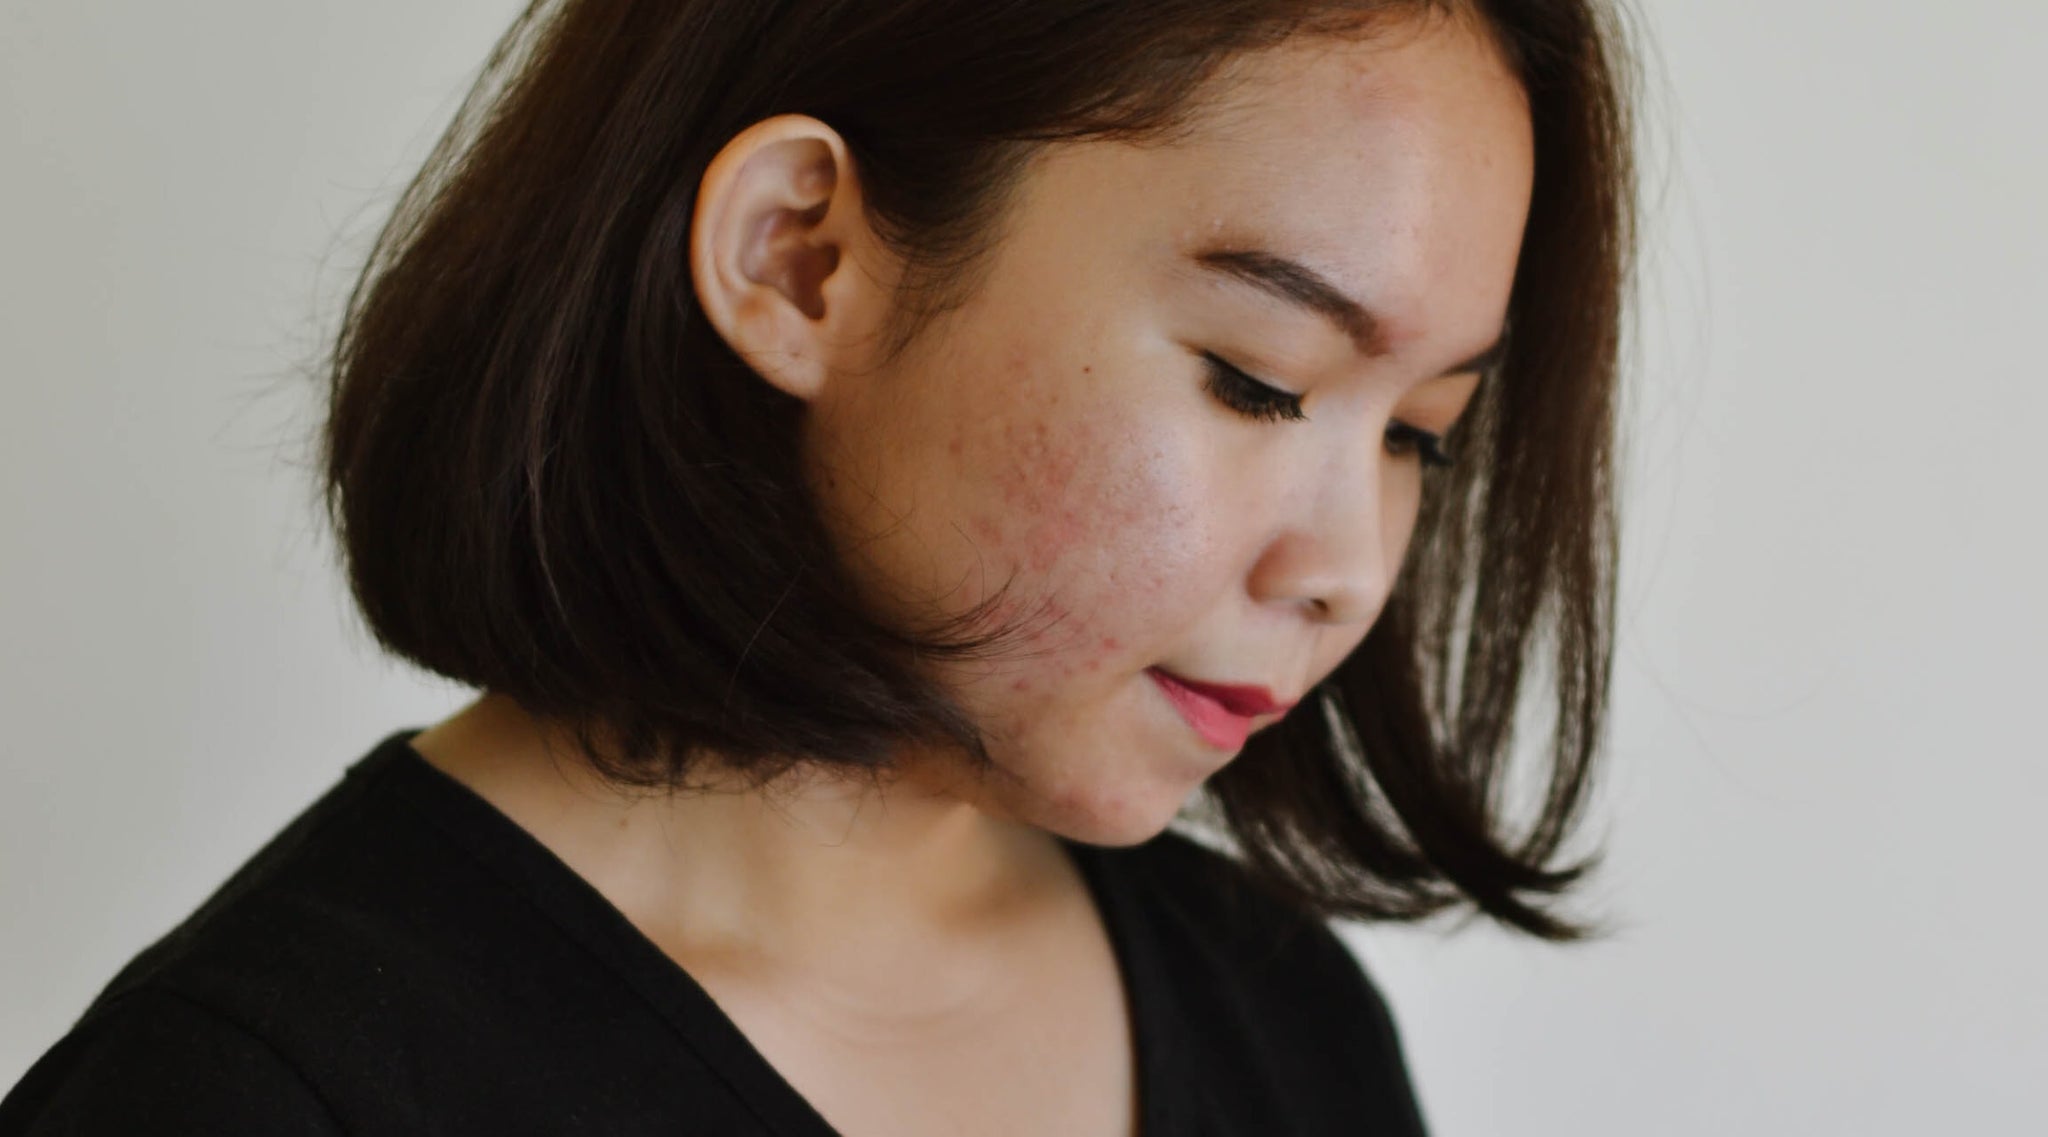 What causes Acne? | A word from our experts